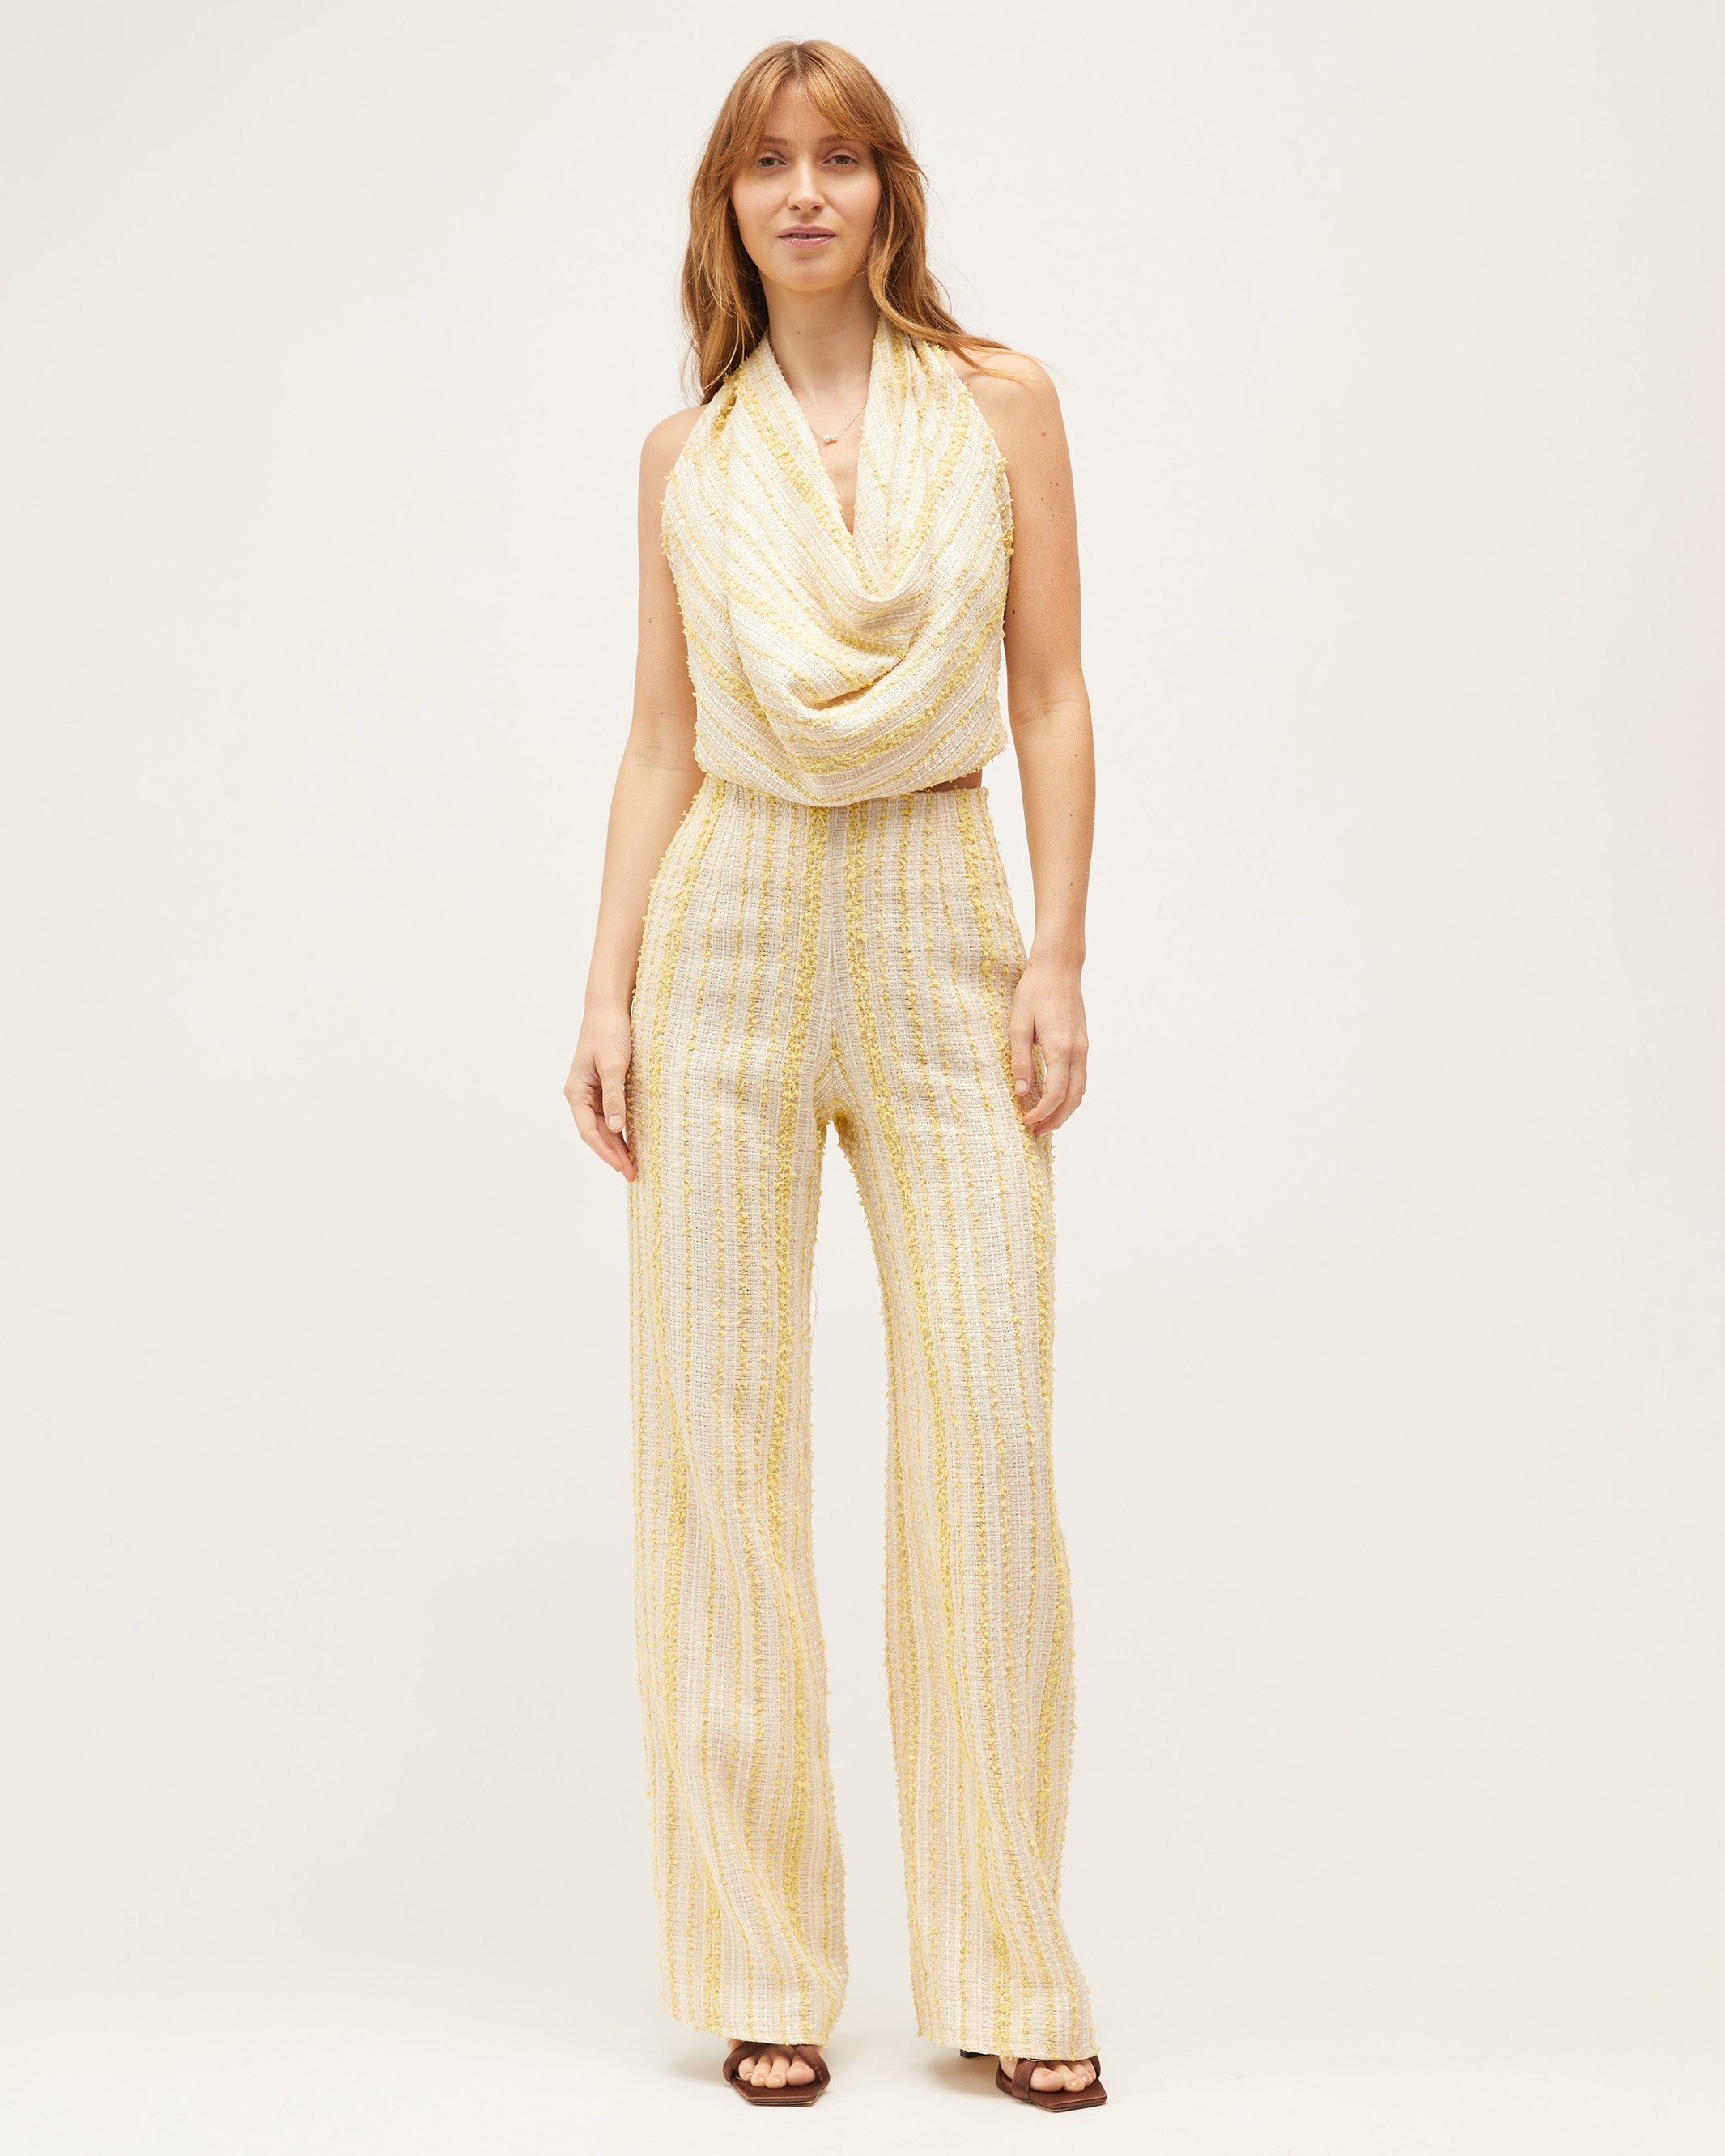 Sonia Pant | Butter $395